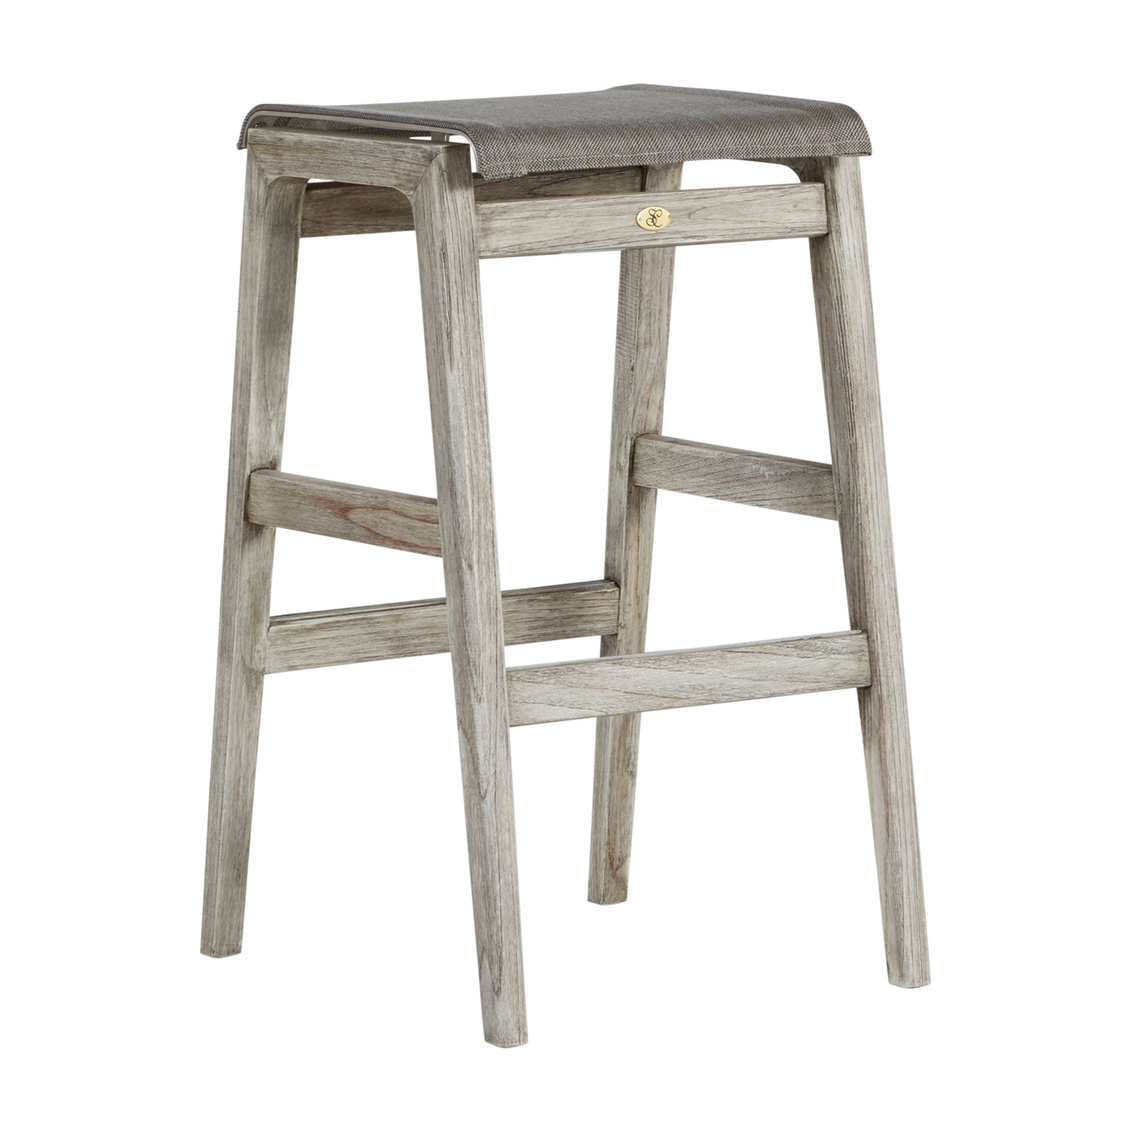 30 inch coast backless bar stool in oyster teak / heather grey sling product image